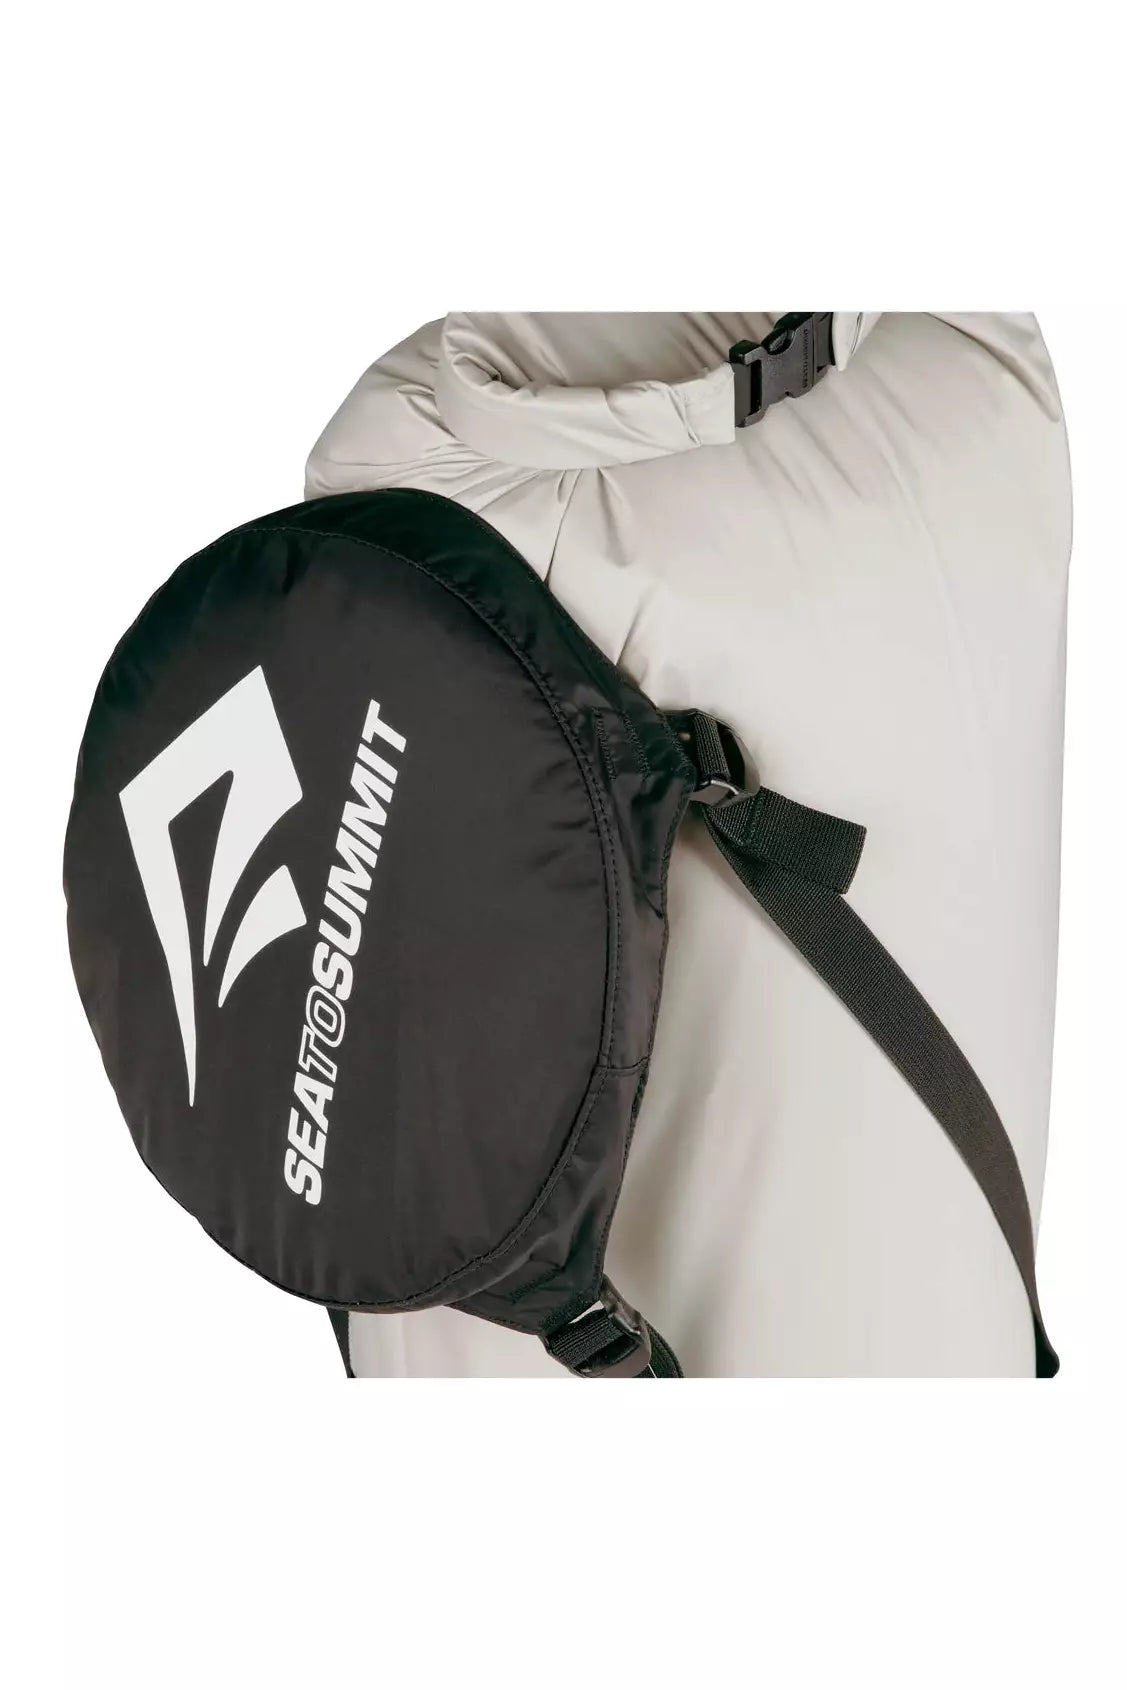 Sea to Summit eVent Compression Dry Sack Sea to Summit Rugged Ram Outdoors